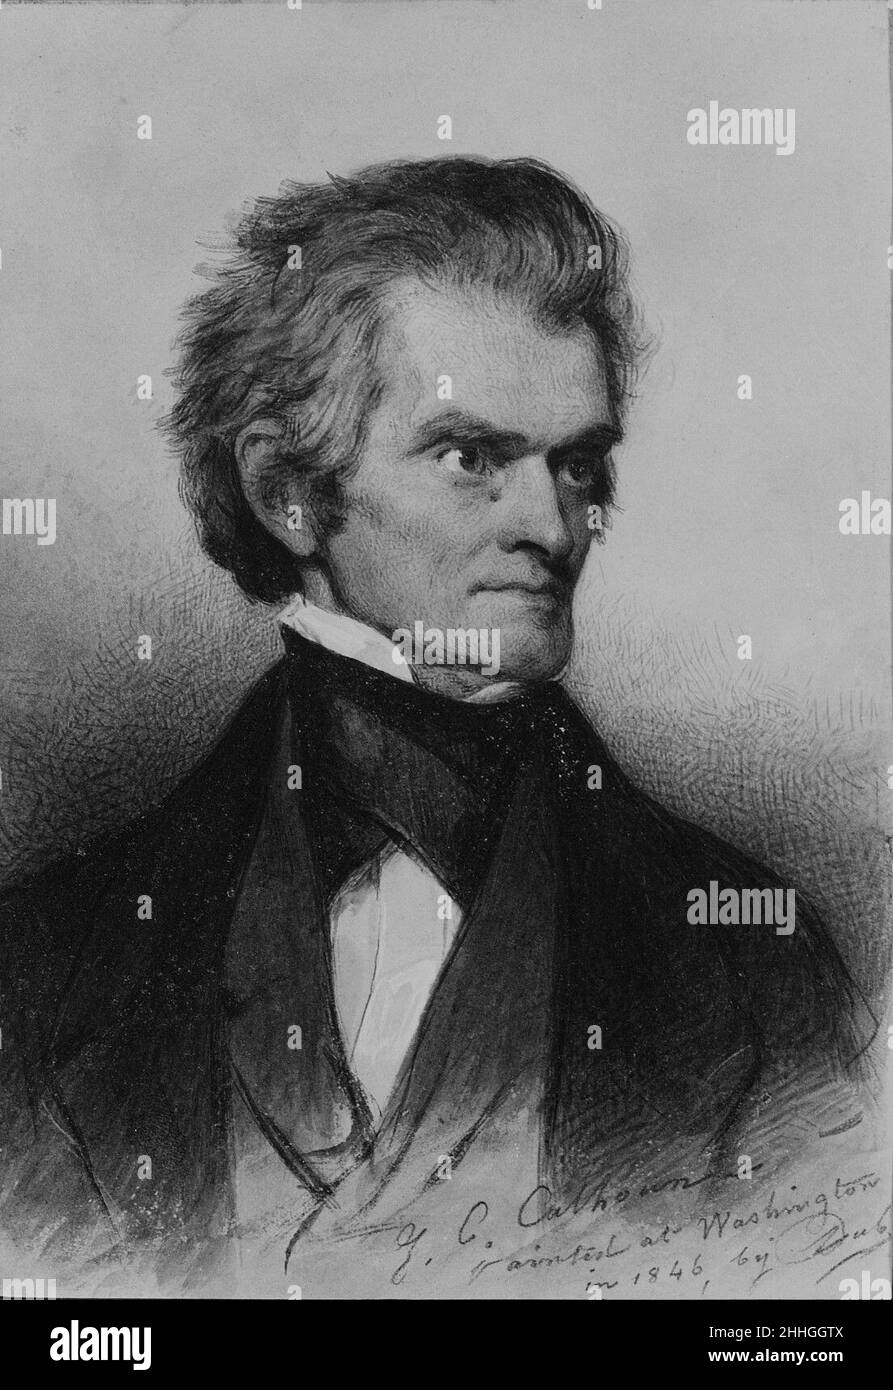 John C. Calhoun 1846 Savinien Edme Dubourjal French At the time he sat for this portrait, Calhoun, one of the preeminent American statesmen of the nineteenth century, was serving as United States Senator from South Carolina. Dubourjal does not idealize his portrait, but emphasizes the striking features of Calhoun’s visage: his piercing, deep-set eyes, high brow, thin lips, and hollow cheeks. The delicate cross-hatching on the face and in the background contrasts with the full, sinuous lines in the hair. Color is used sparingly, only in the face, and there are touches of white gouache on the ey Stock Photo